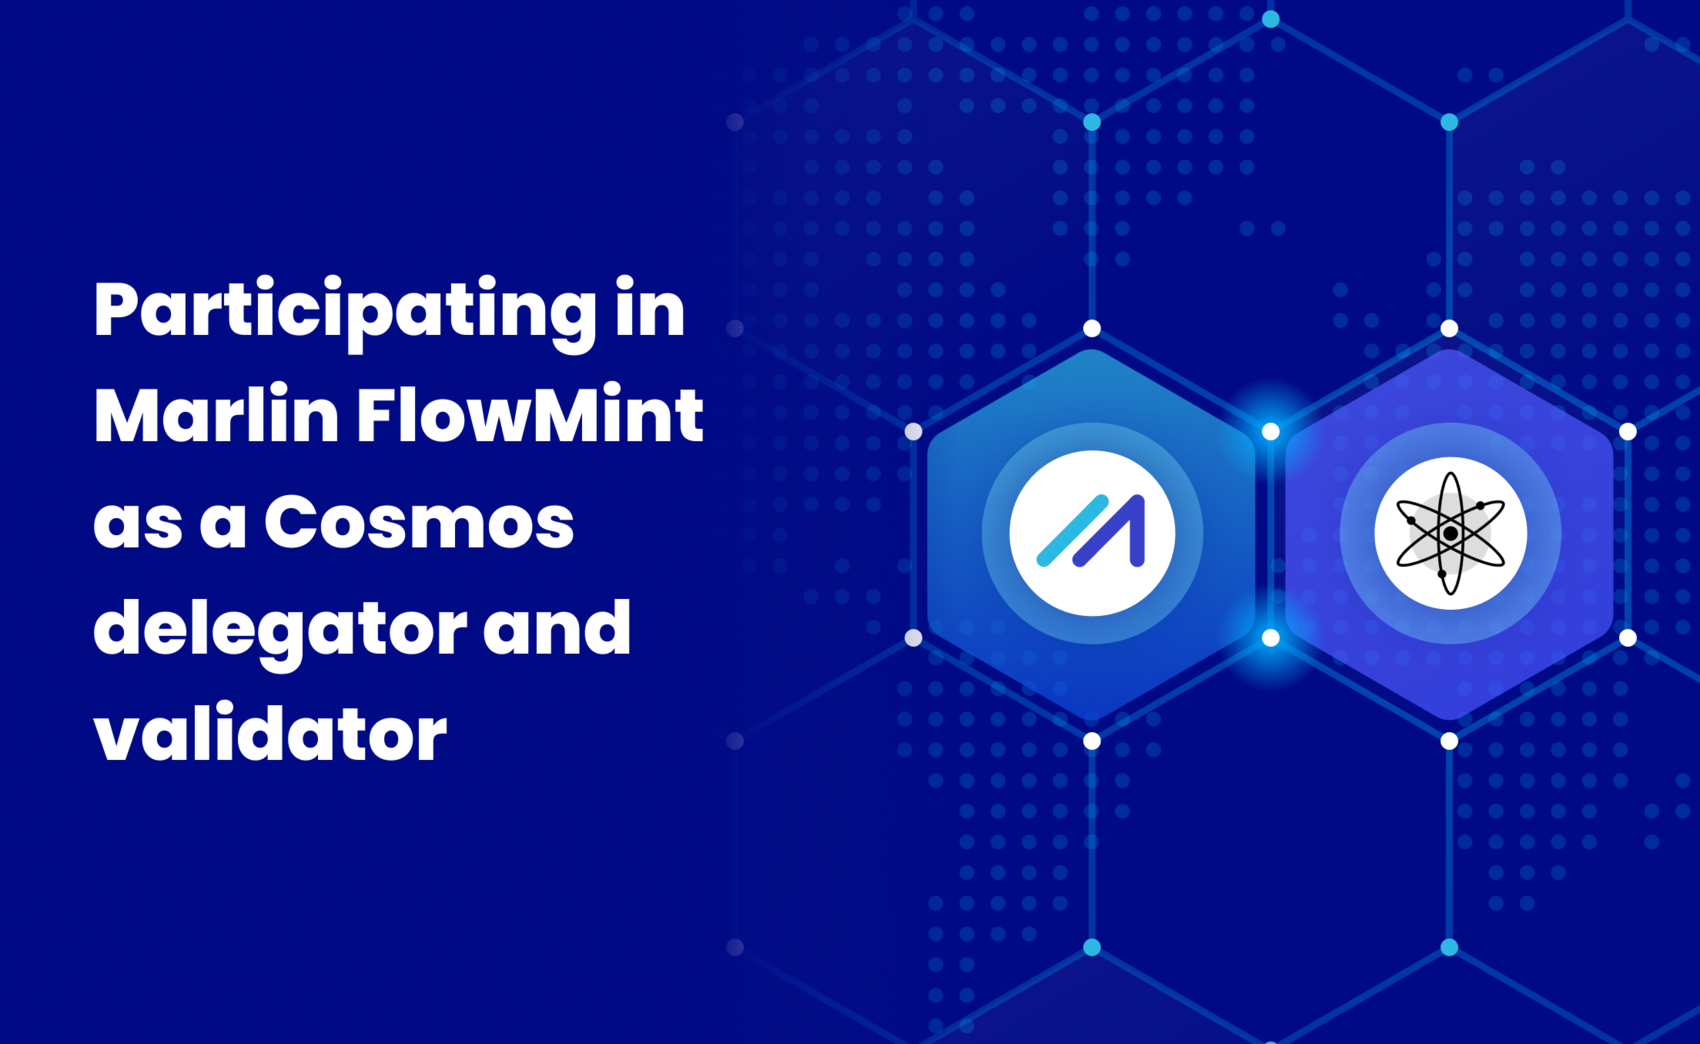 Participating in Marlin FlowMint as a Cosmos delegator and validator